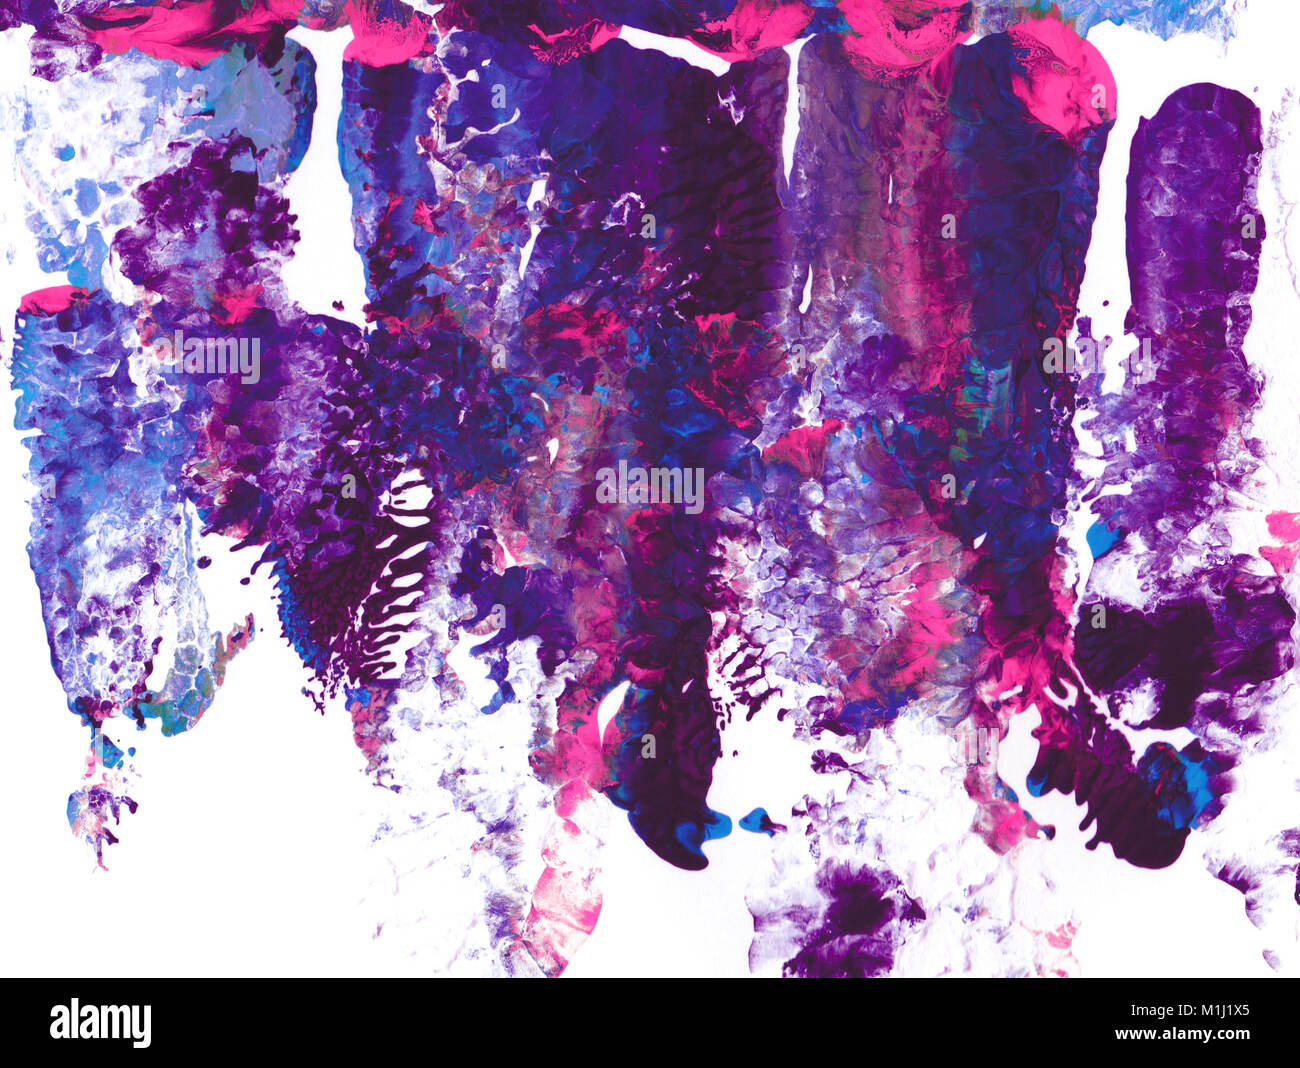 Purple and pink acrylic paint in abstract smears on white paper background Stock Photo